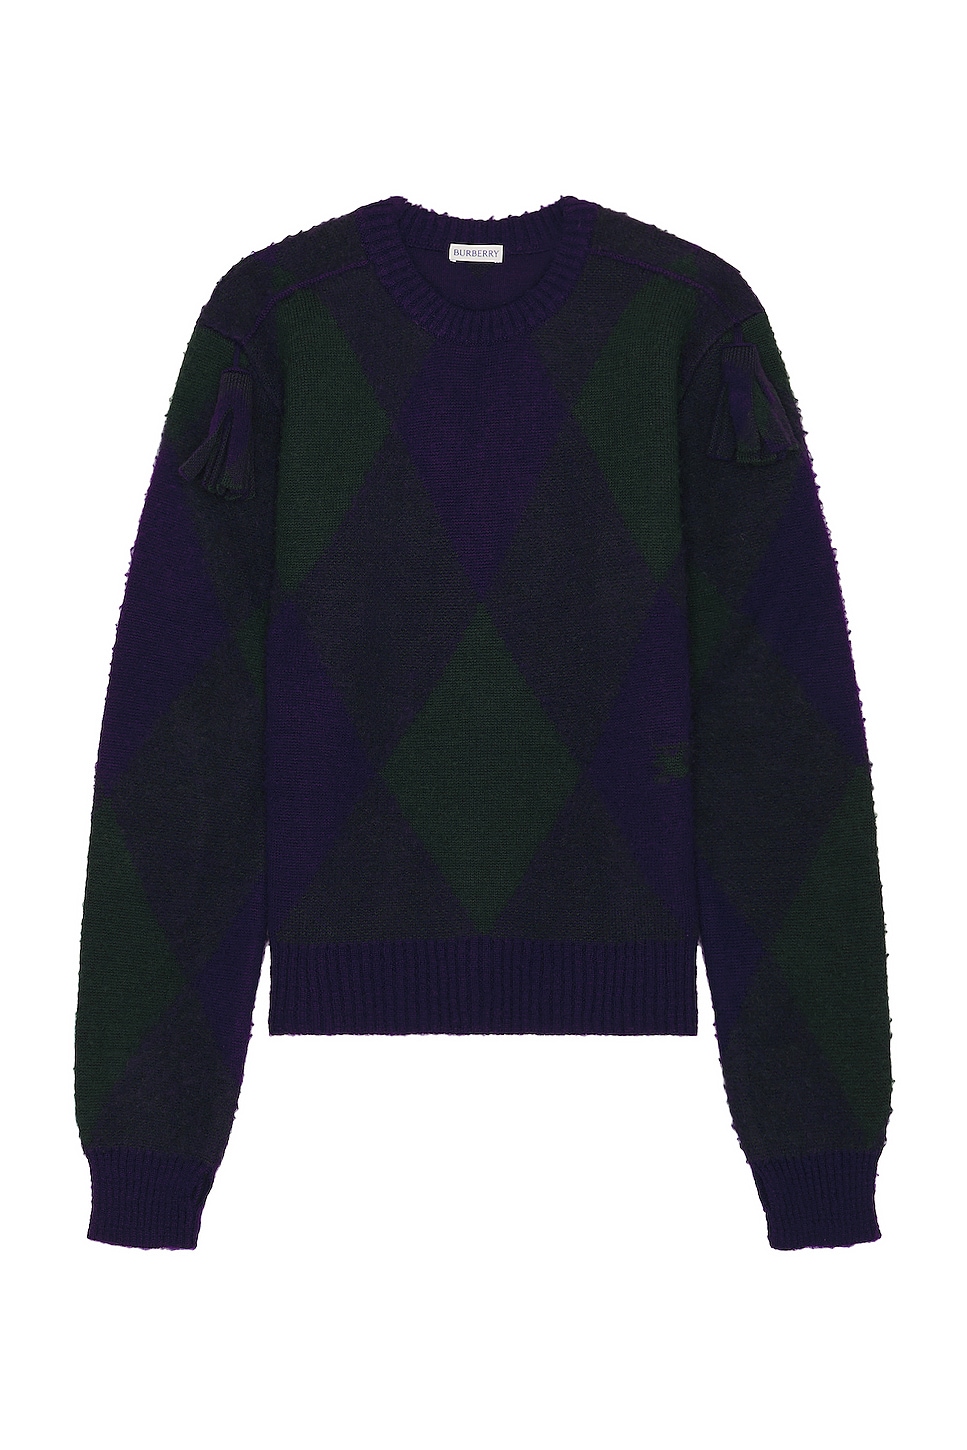 Image 1 of Burberry Pattern Sweater in Royal Ip Pattern